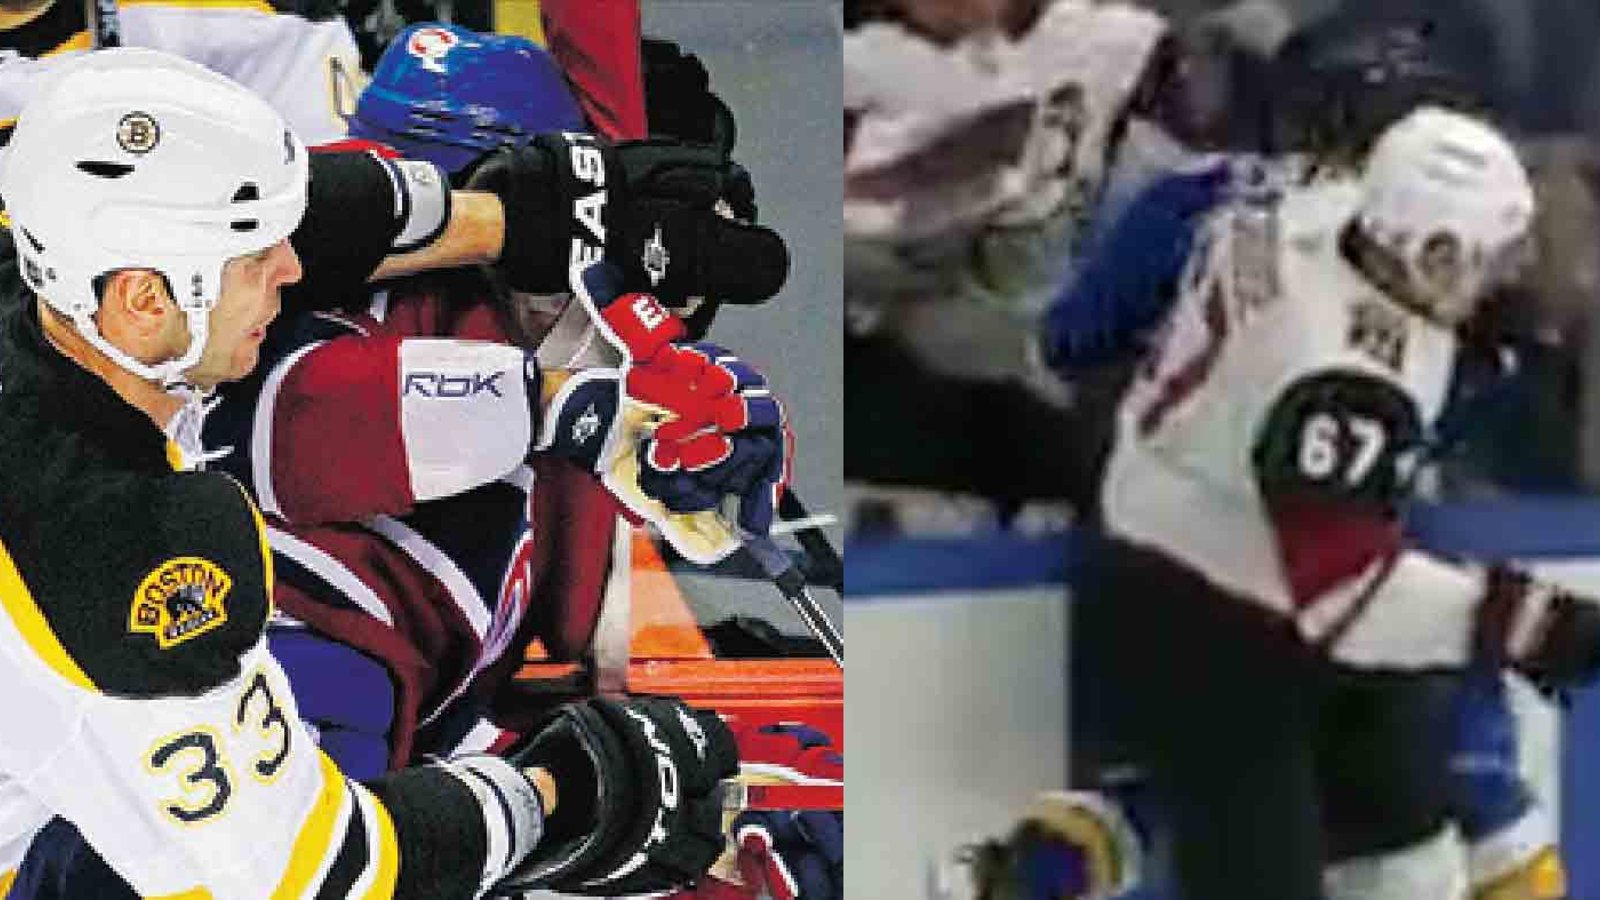 Schenn gets his face smashed into boards in incident that reminds many of the Pacioretty hit! 